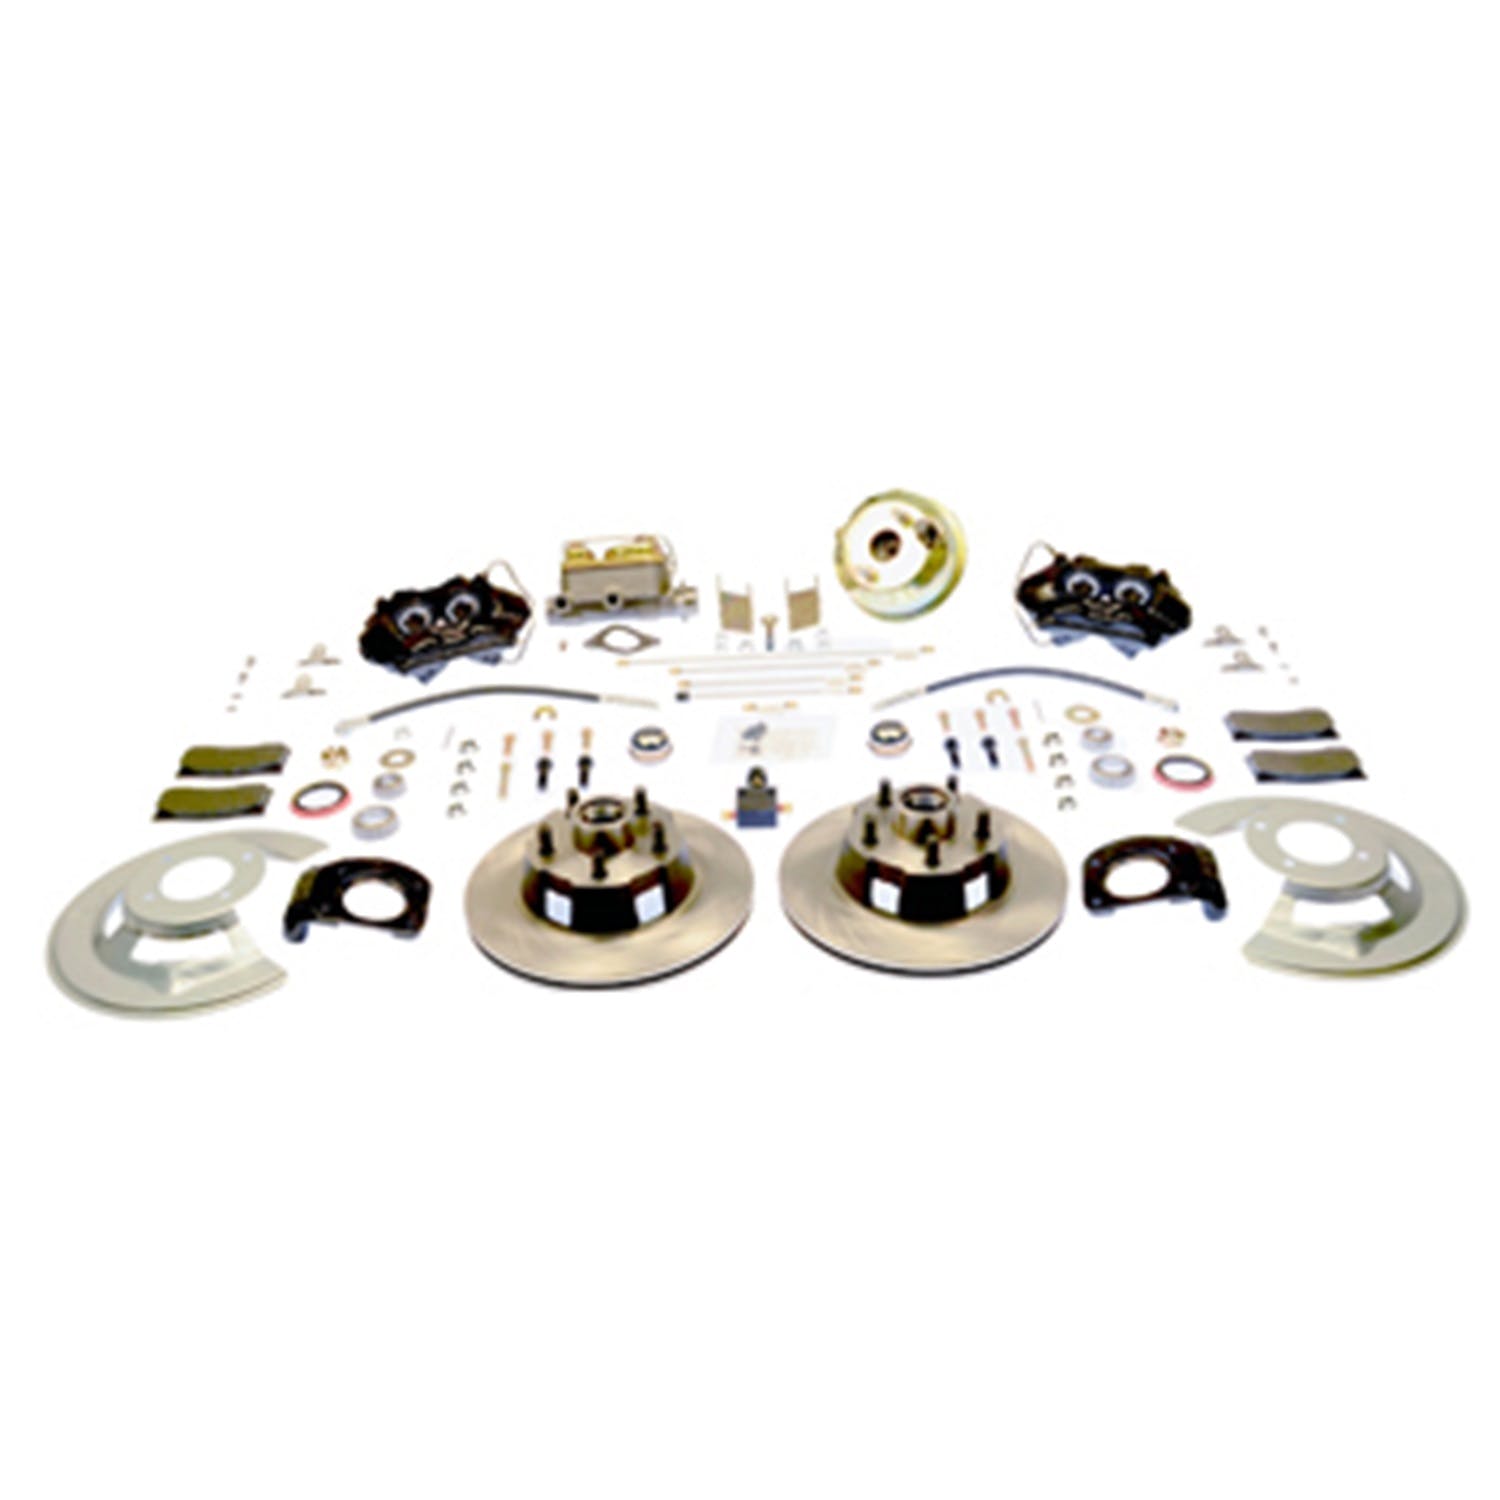 Stainless Steel Brakes A120-20 Front conv kit 64-66 Mustang power